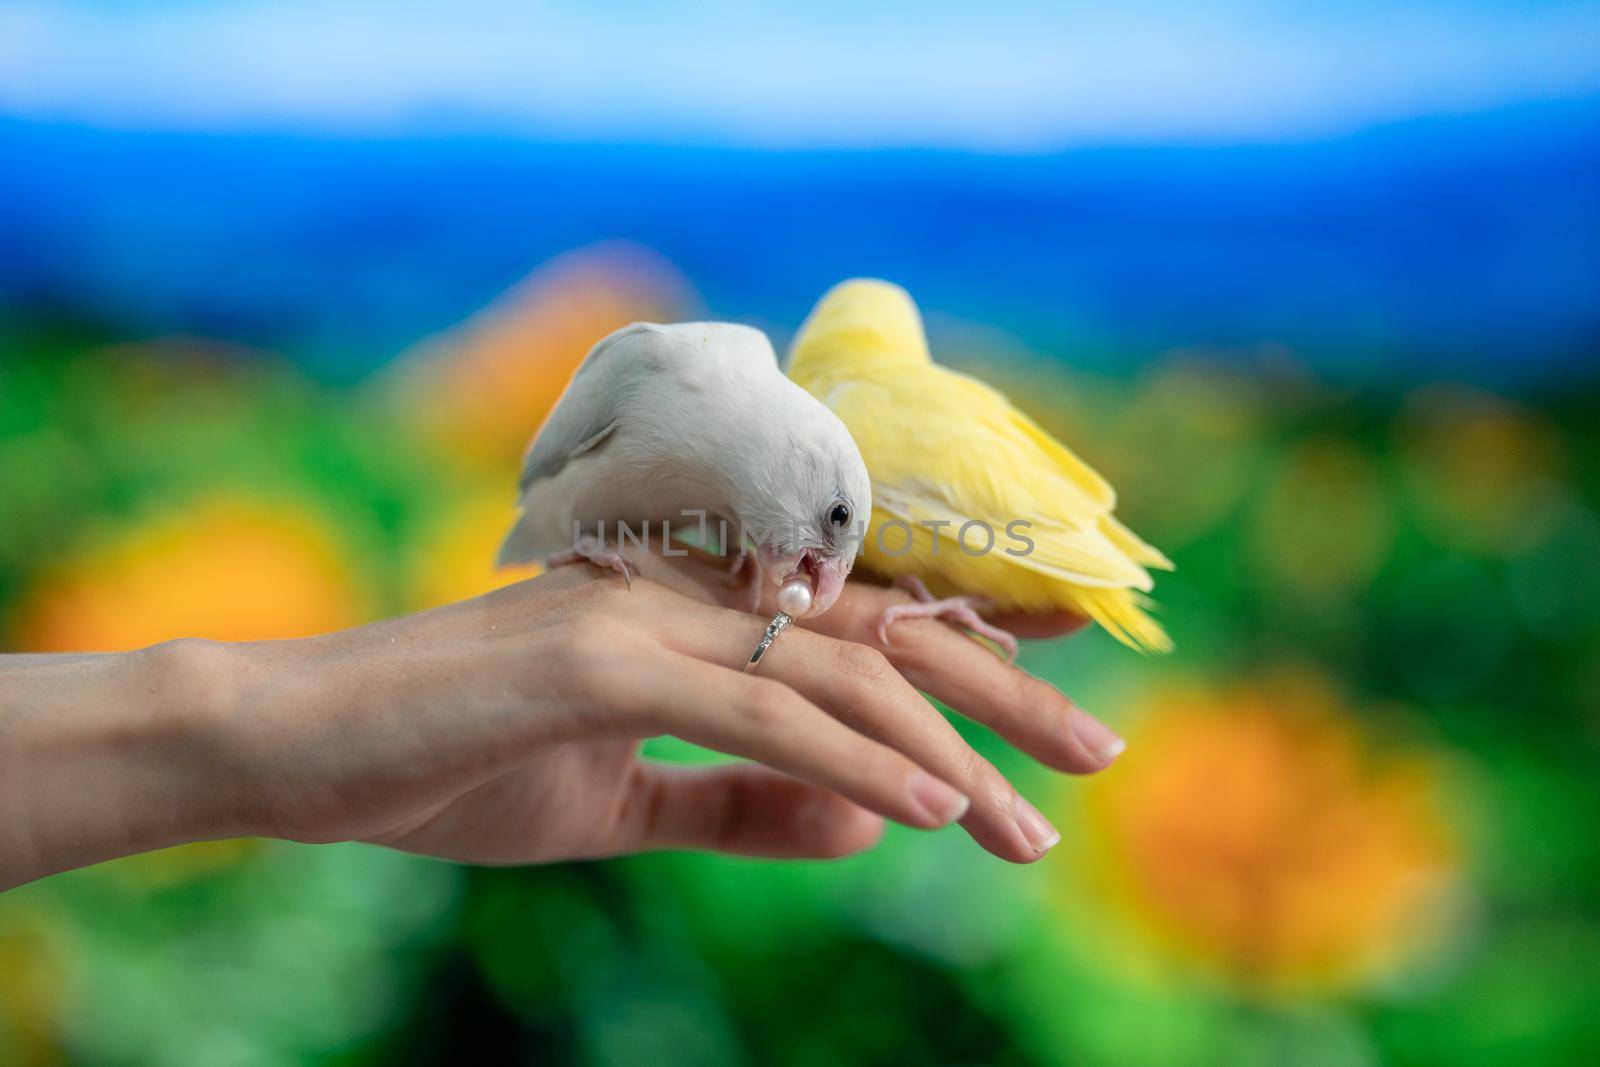 Tiny parrot yellow and white Forpus bird on hand, white parrot try to bite pearl ring. by sirawit99